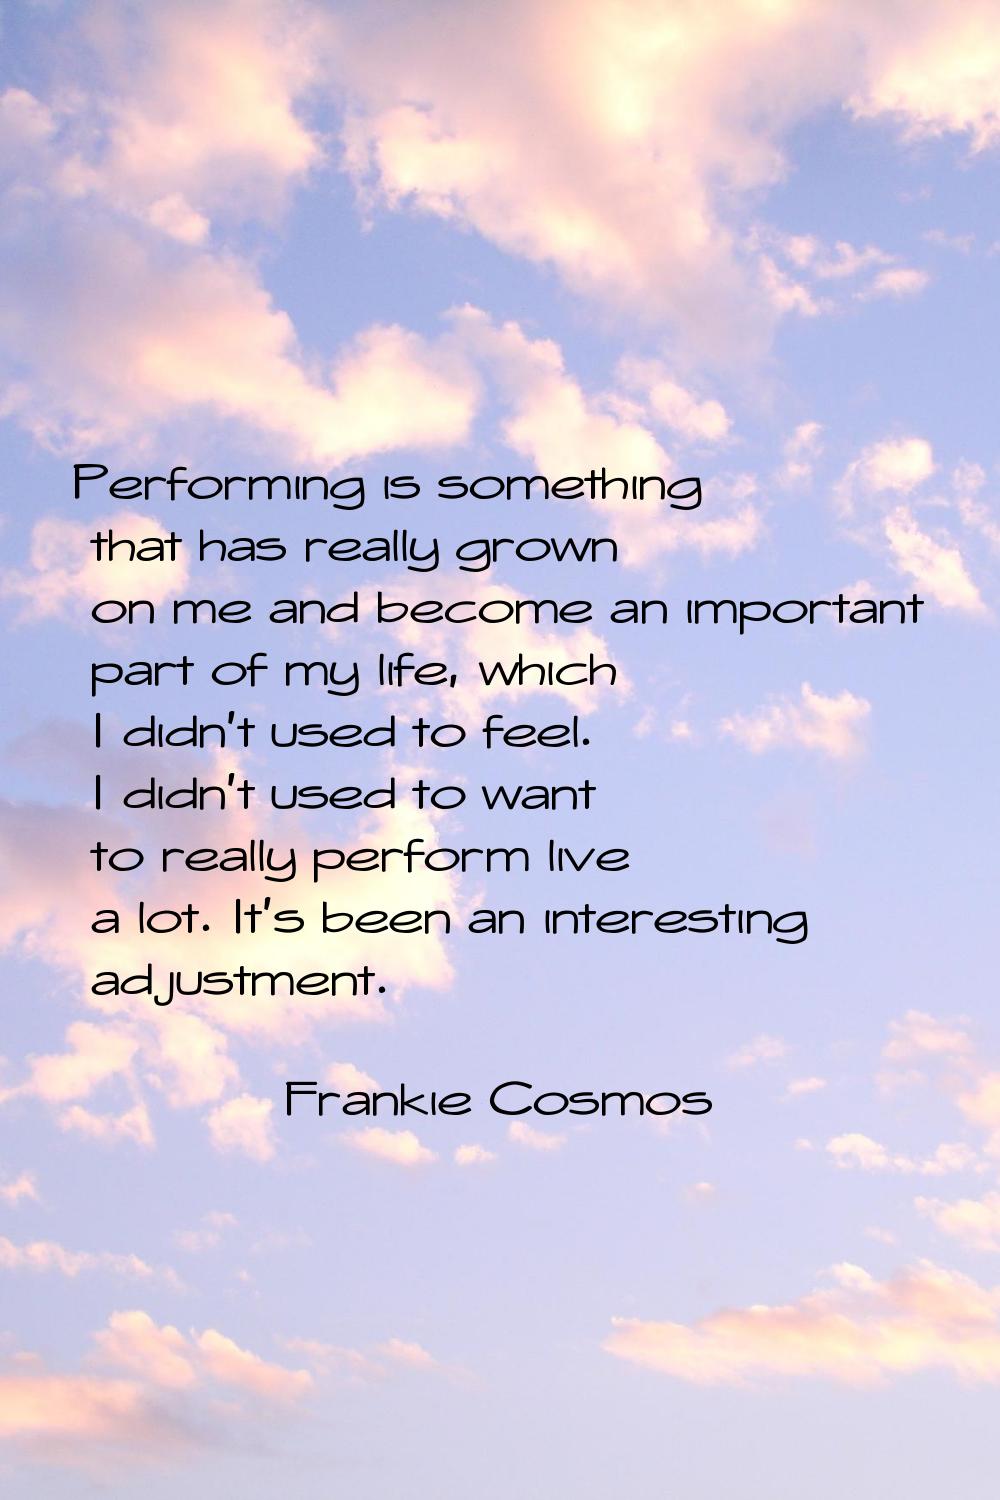 Performing is something that has really grown on me and become an important part of my life, which 